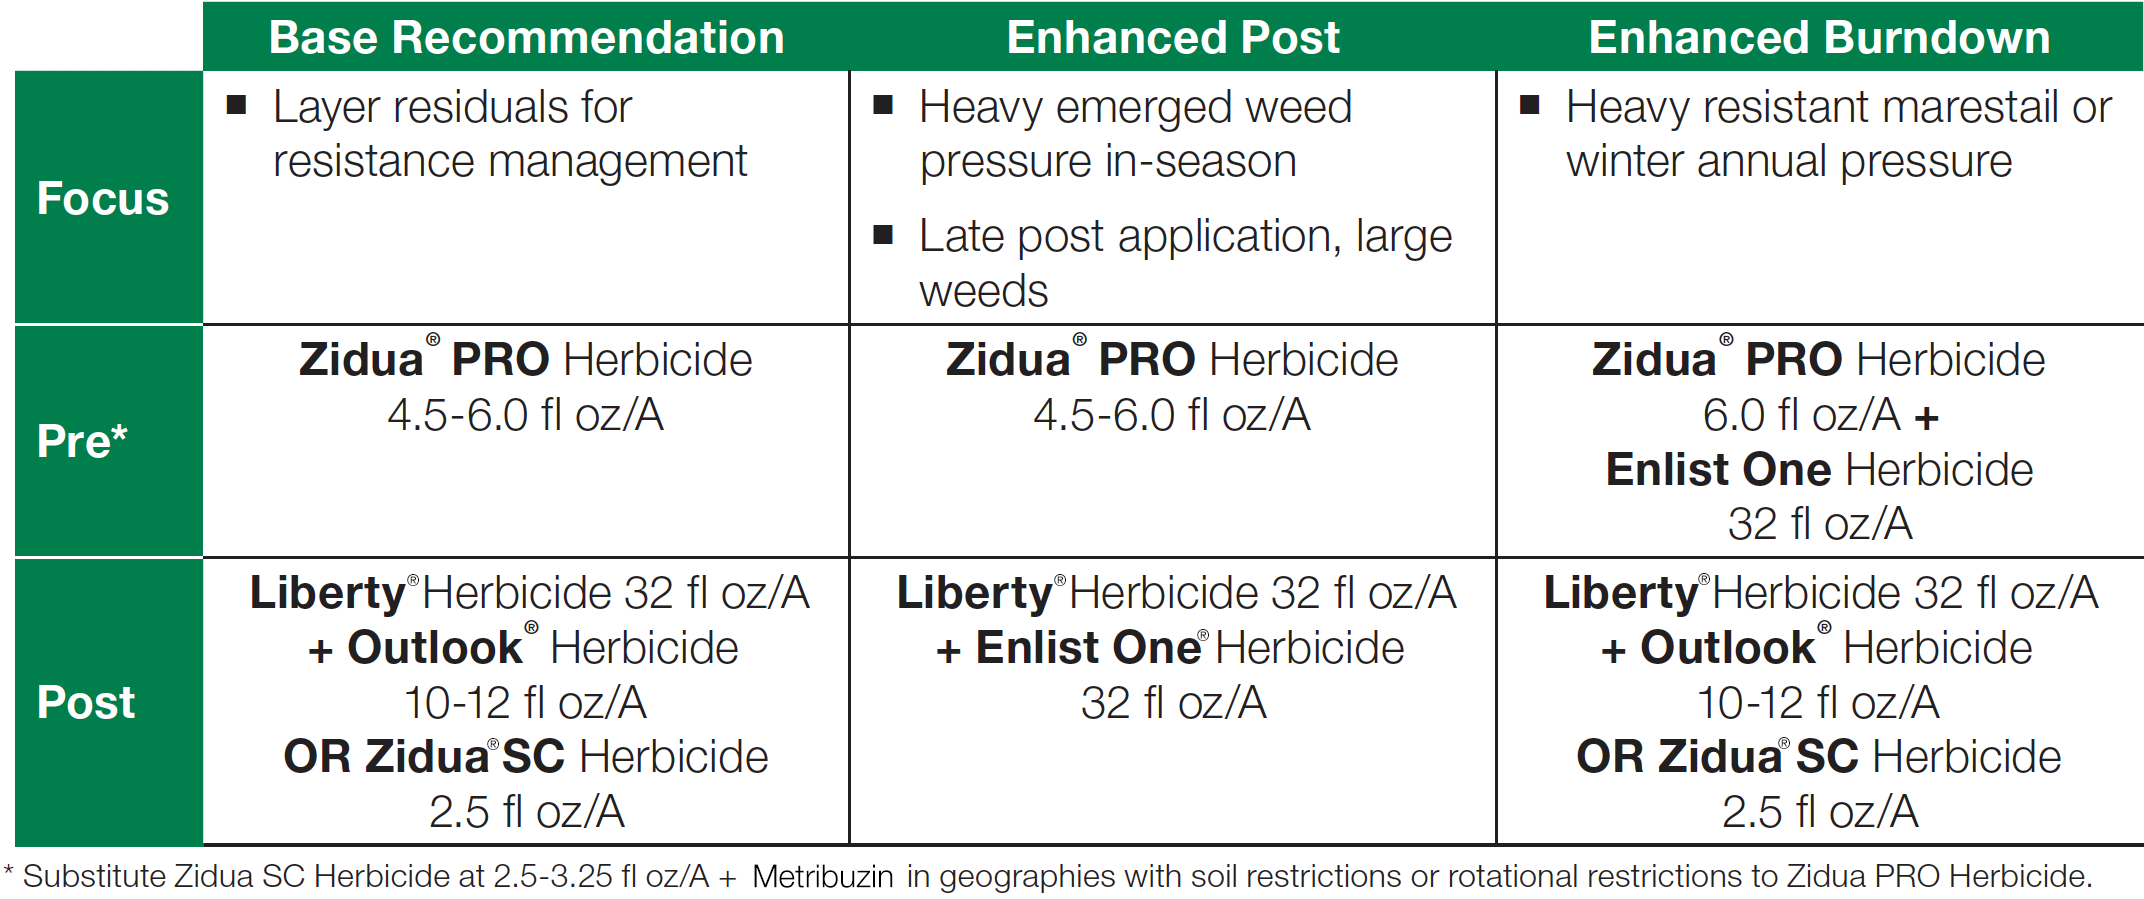 Xitavo Soybean Seed BASF Herbicide Recommendations